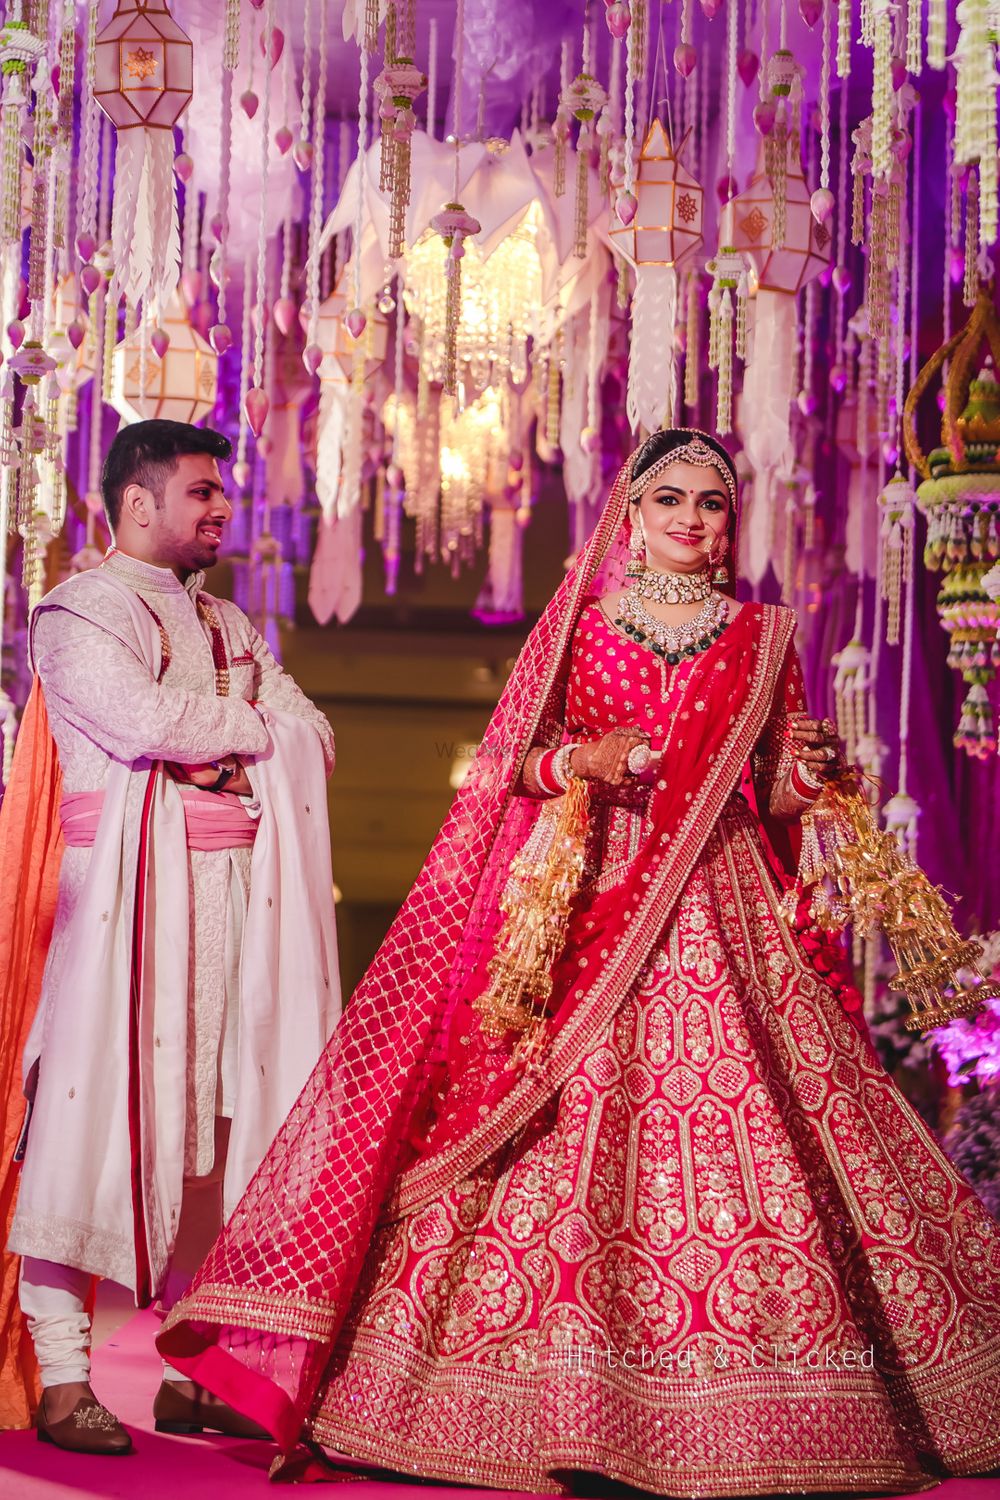 Photo of A shot of the bride in red lehenga twirling as the groom looks on